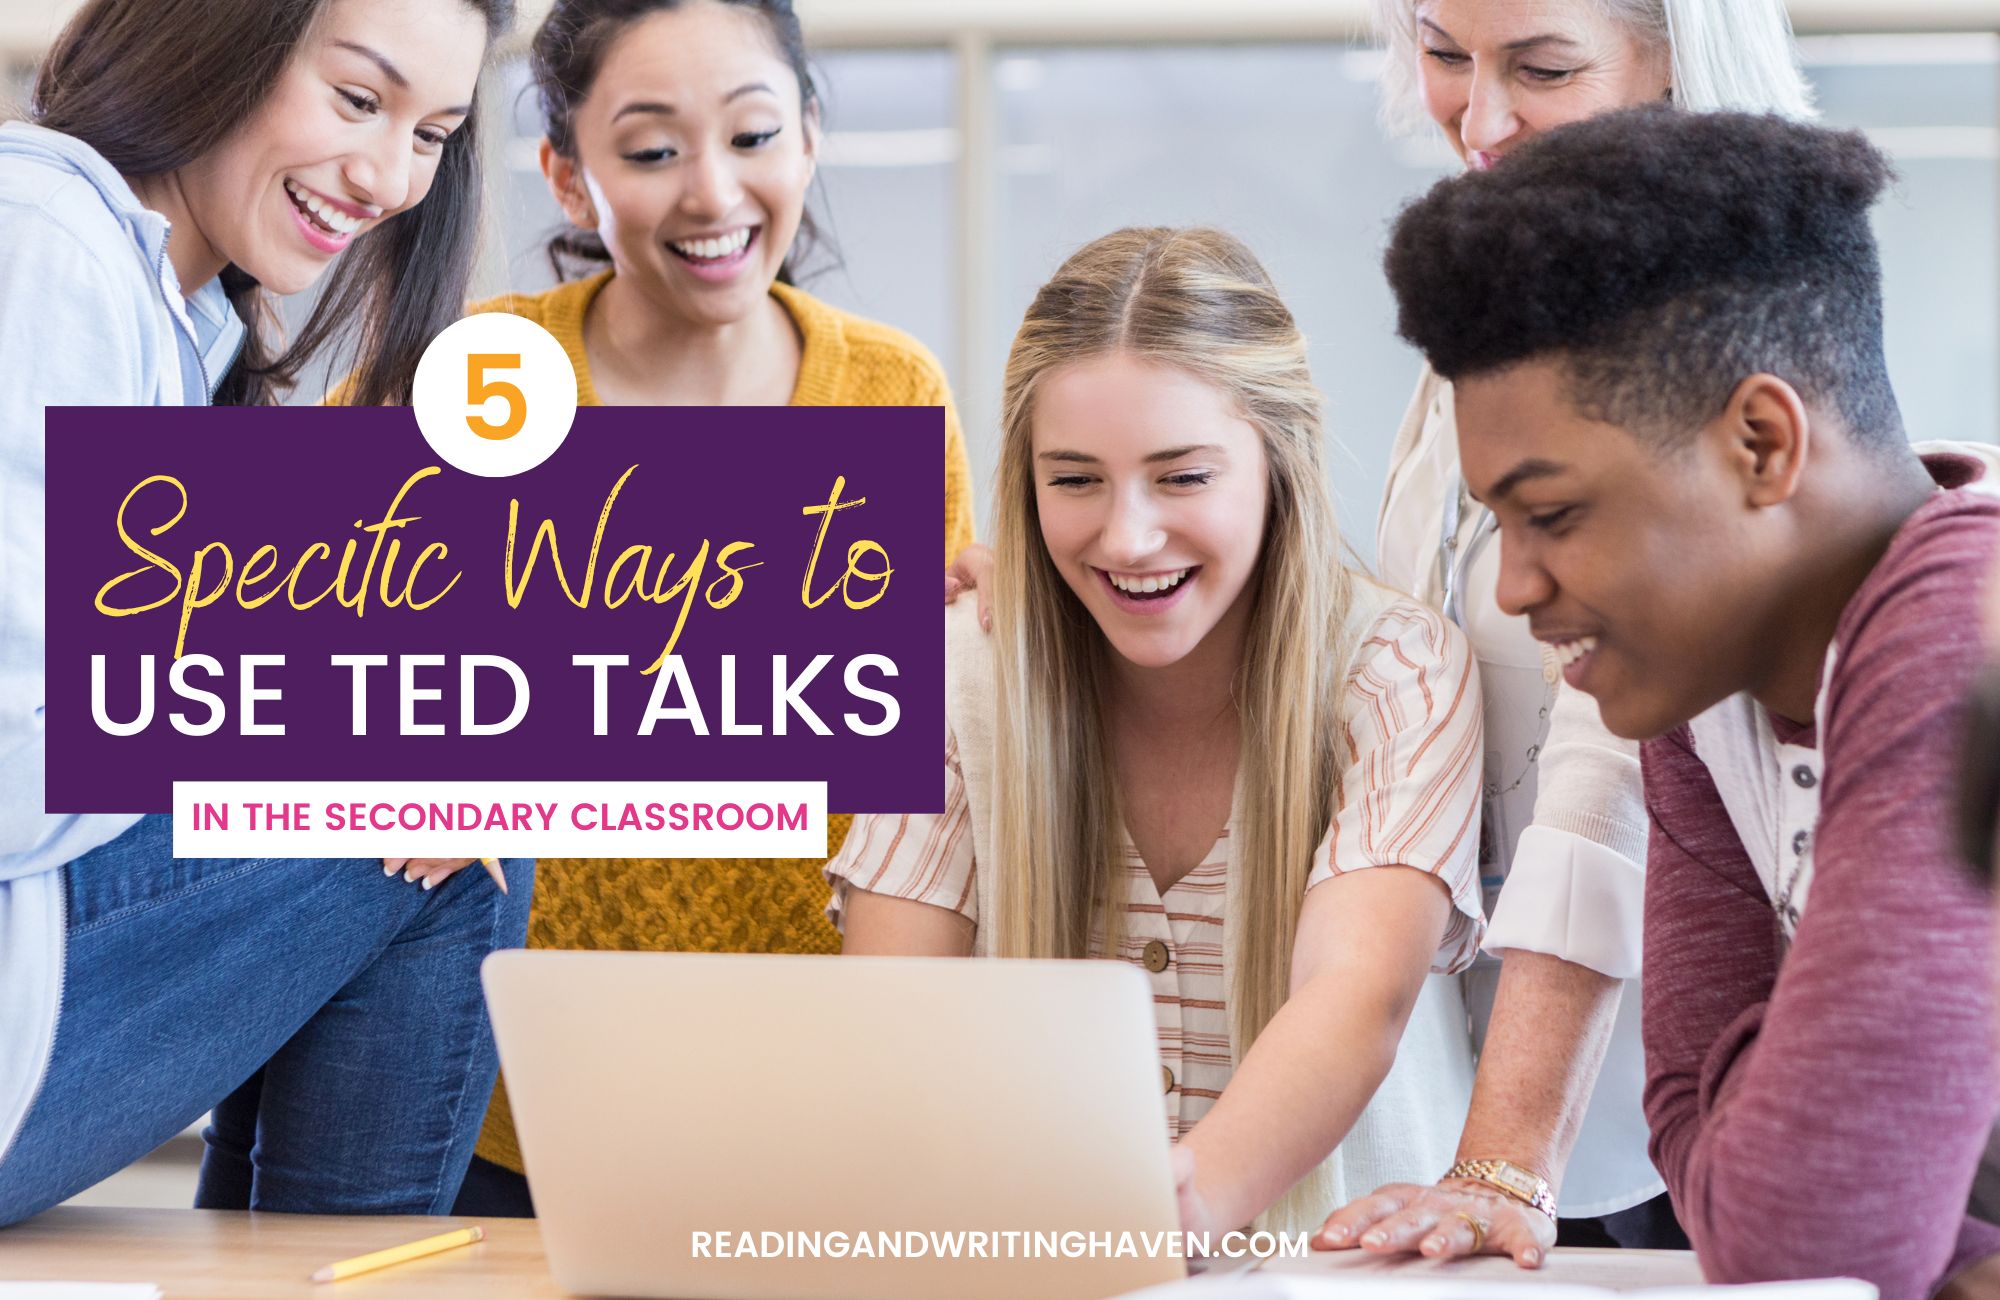 5 Helpful Ways to Use TED Talks in the Classroom